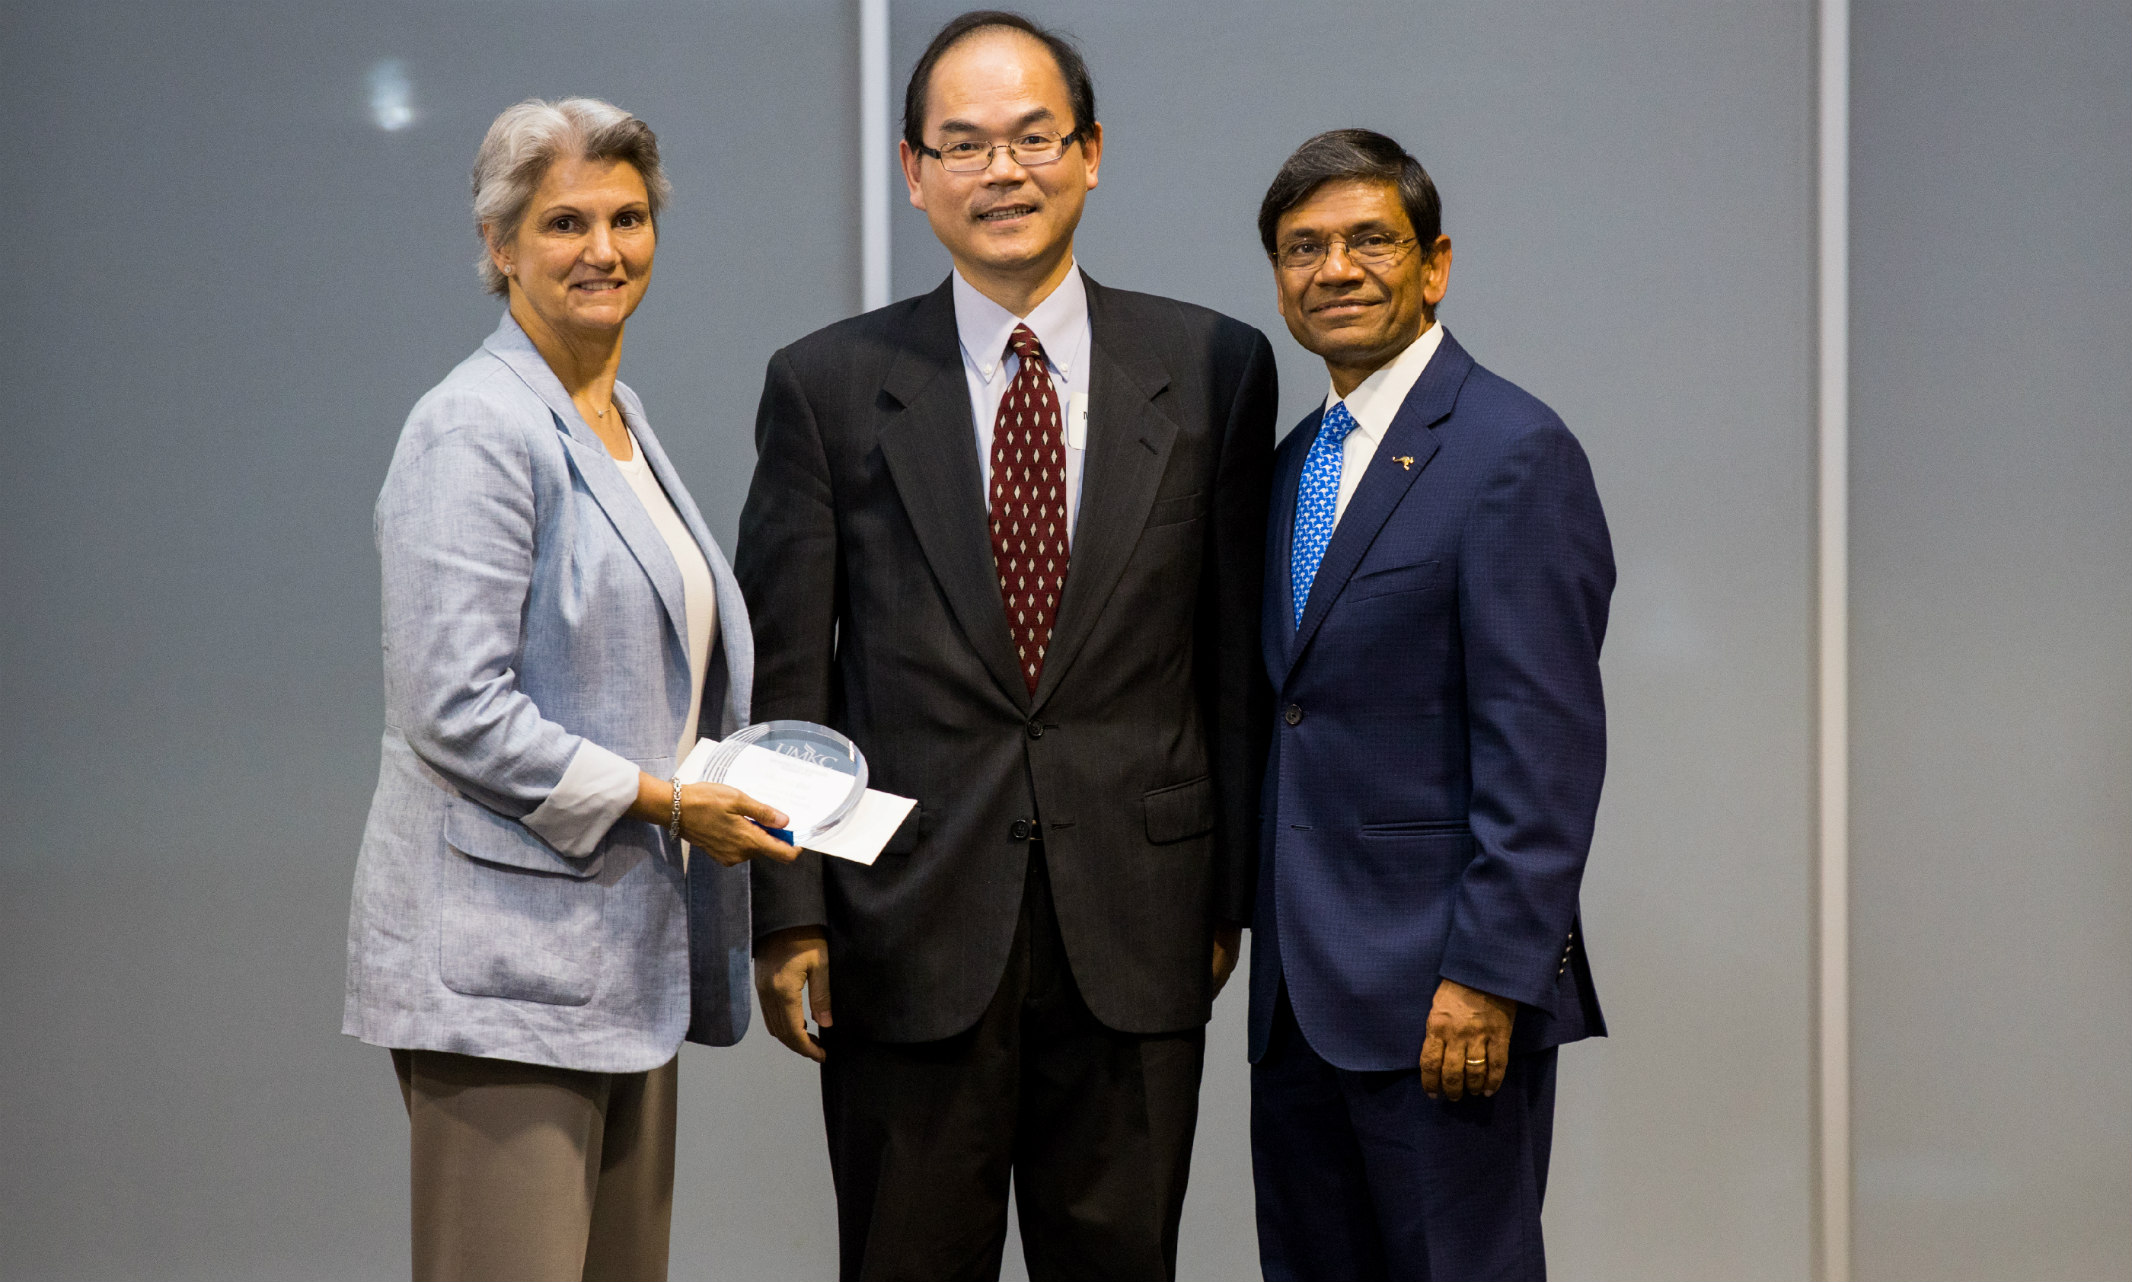 Michael Wei poses for photo holding award with chancellor and provost